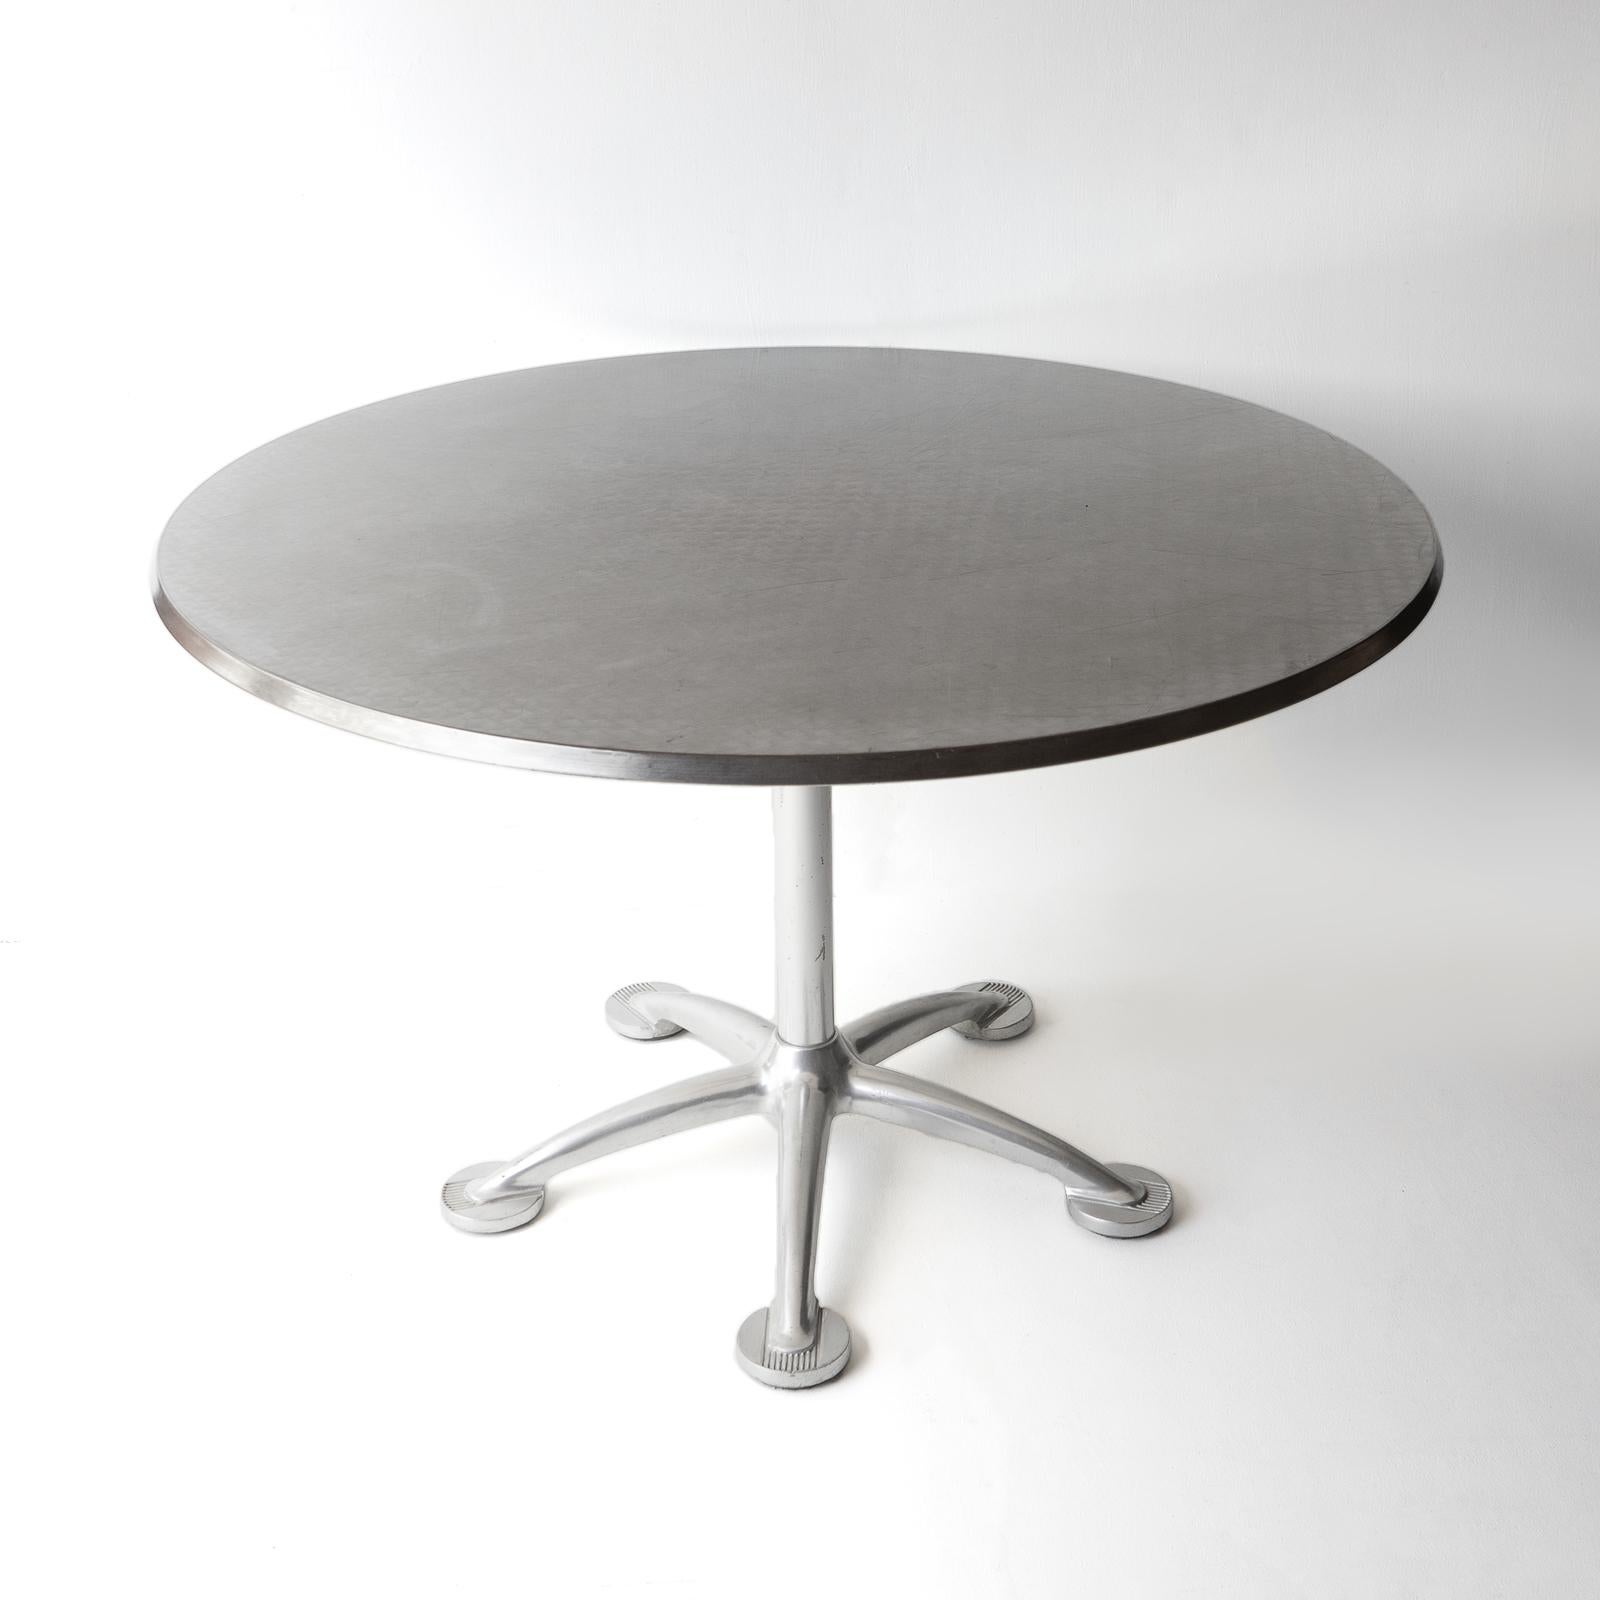 Spanish Large Vintage Circular Indoor/Outdoor Bistro Table By Jorge Pensi For Amat For Sale